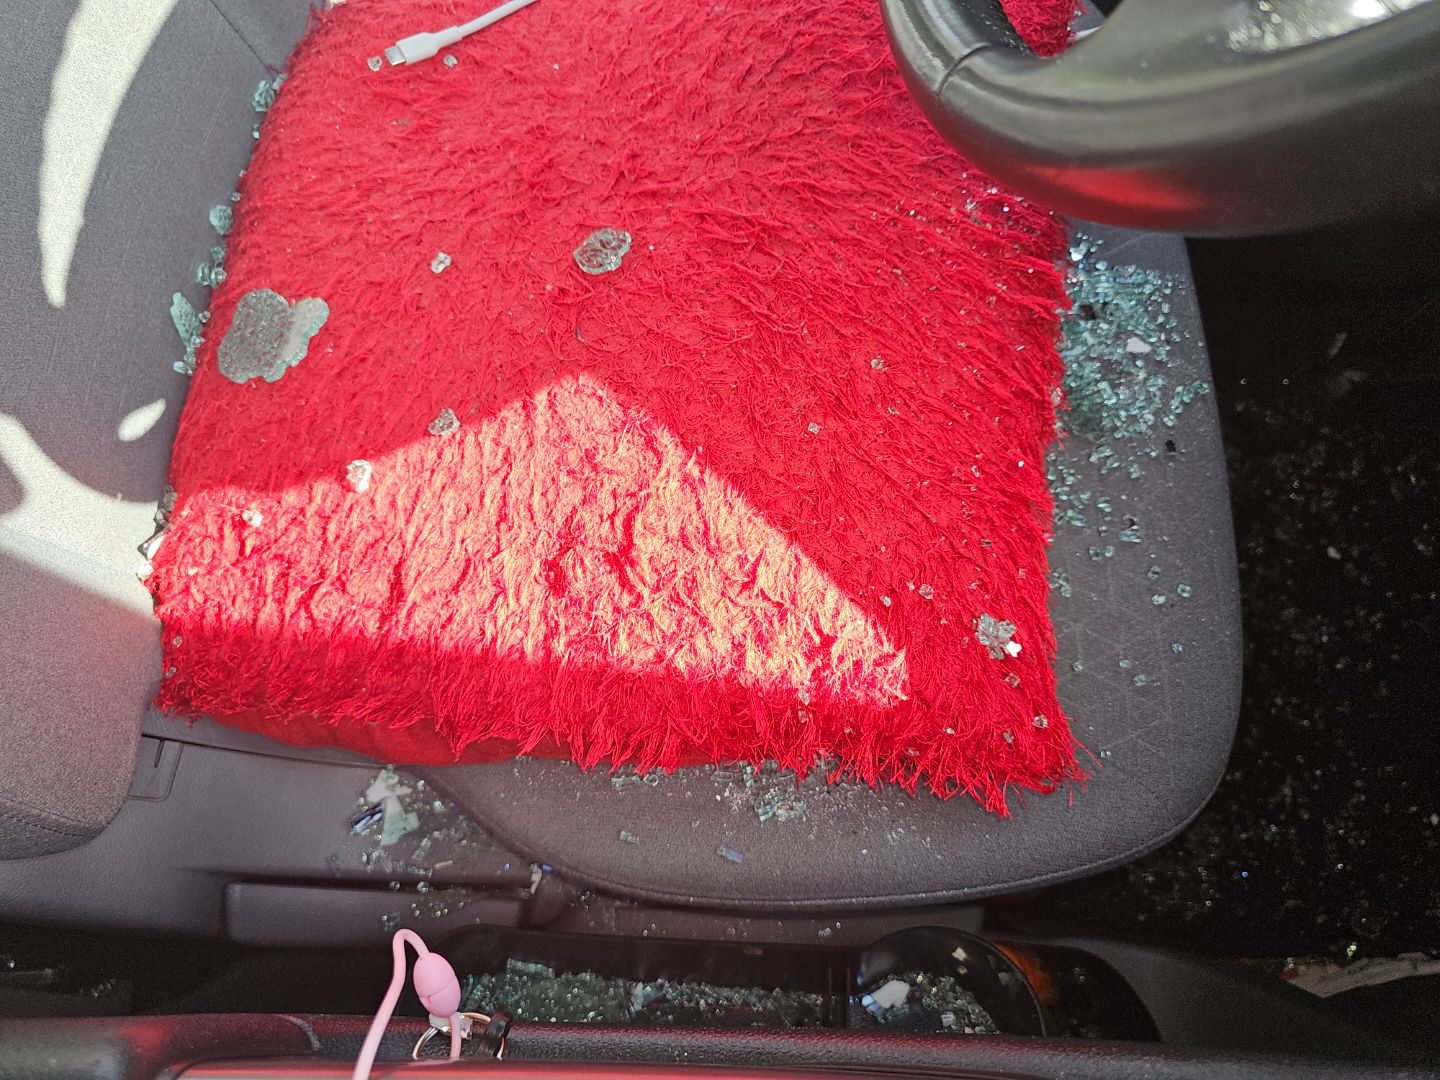 Shattered glass in car.